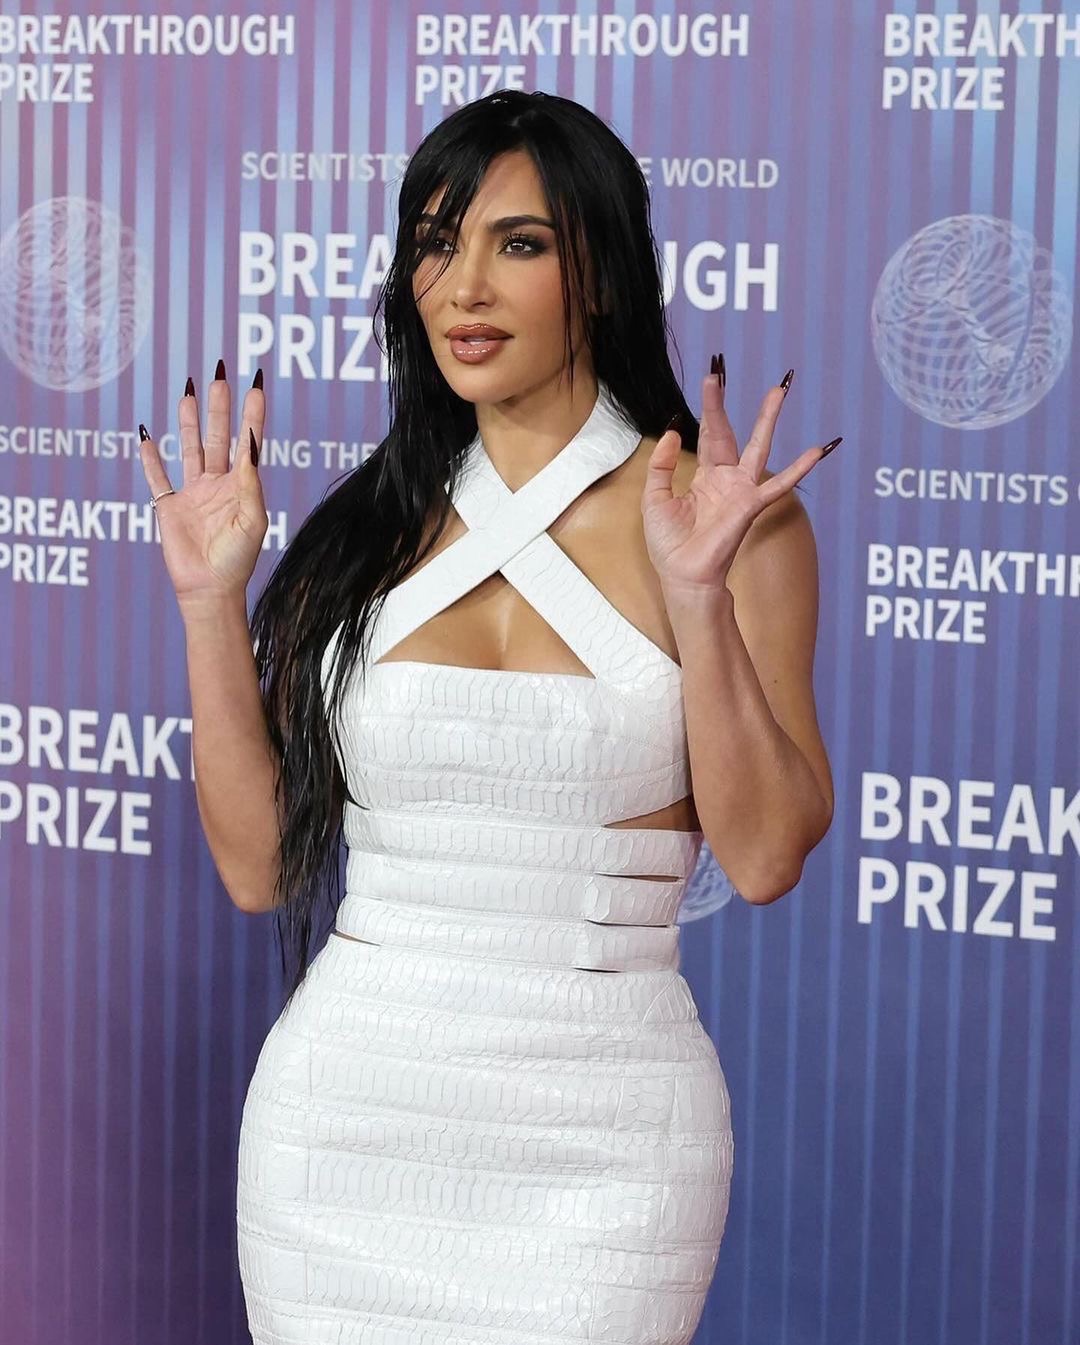 Fashio n Bomb Duo Kim Kardashian Attends the 2024 Breakthrough Prize Ceremony in a White Custom Alaia Dress with Kris Jenner in a All Black Dolce Gabbana Look